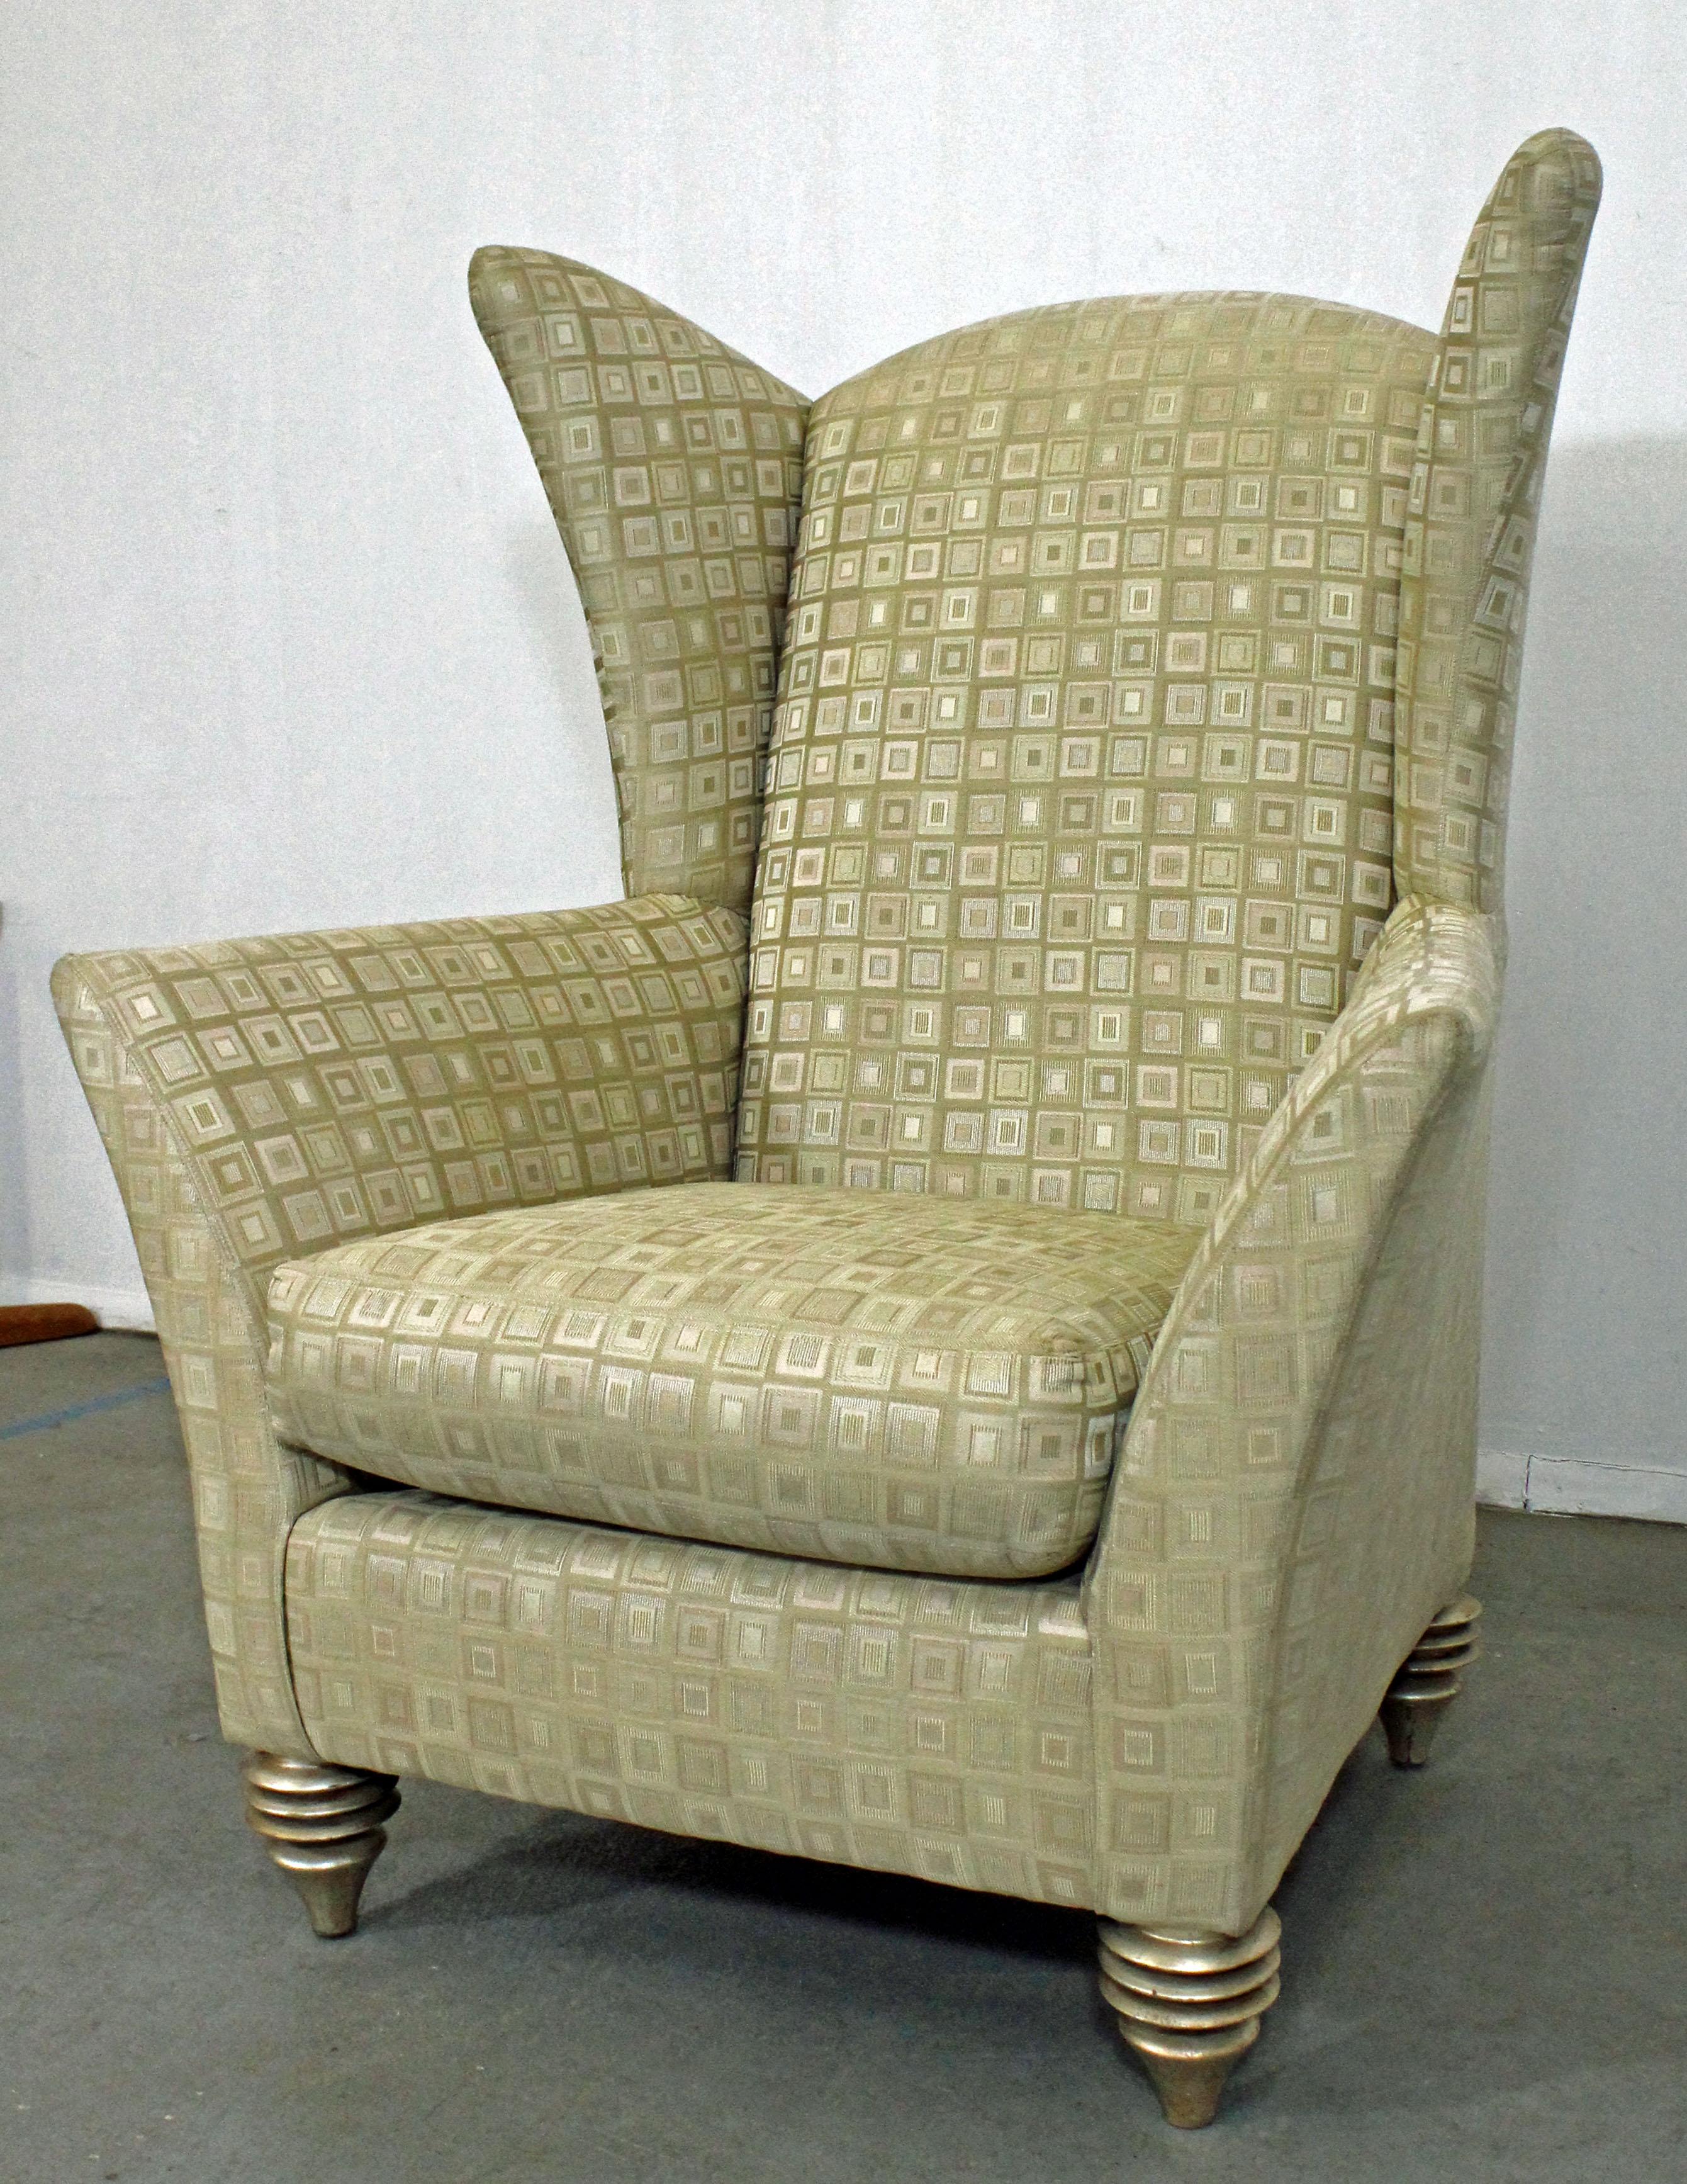 What a find. Offered is a unique modern wing chair designed by Larry Laslo for Directional. This chair features uniquely sculpted 'wings' and feet. It is in good condition, showing normal age wear (see pictures). It is signed Larry Laslo for